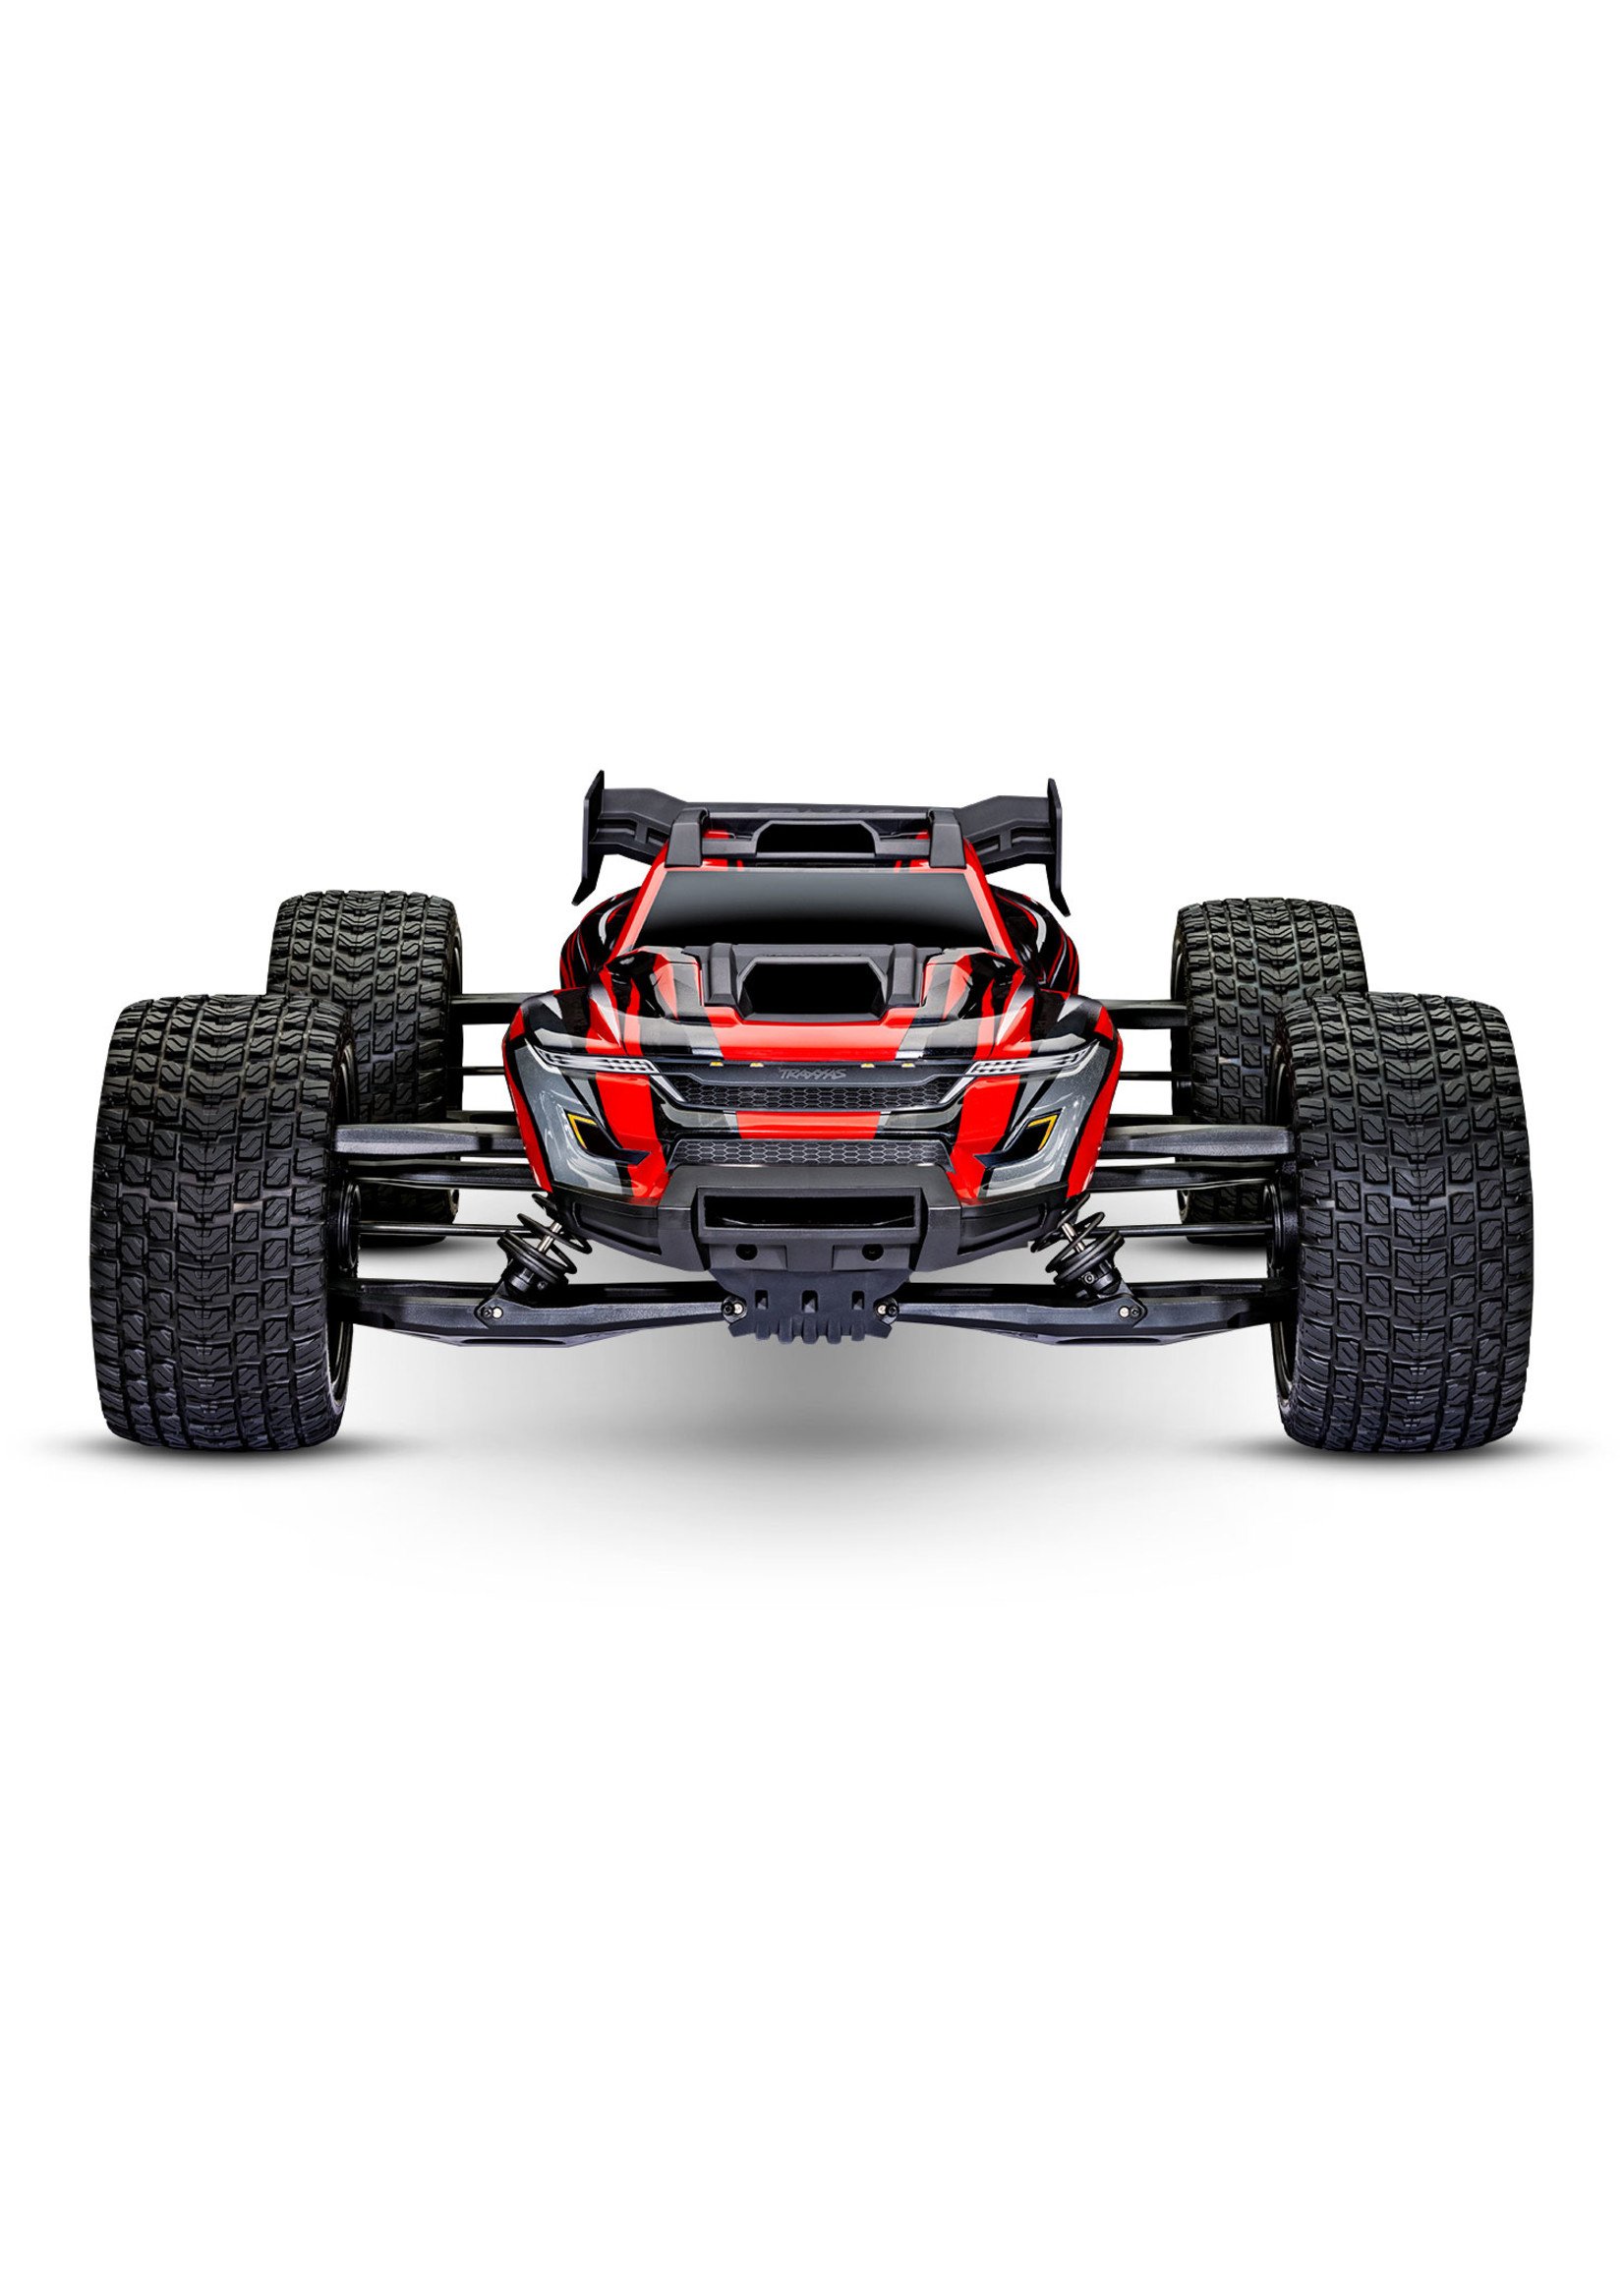 Traxxas 780864RED - XRT w/8S ESC - Red